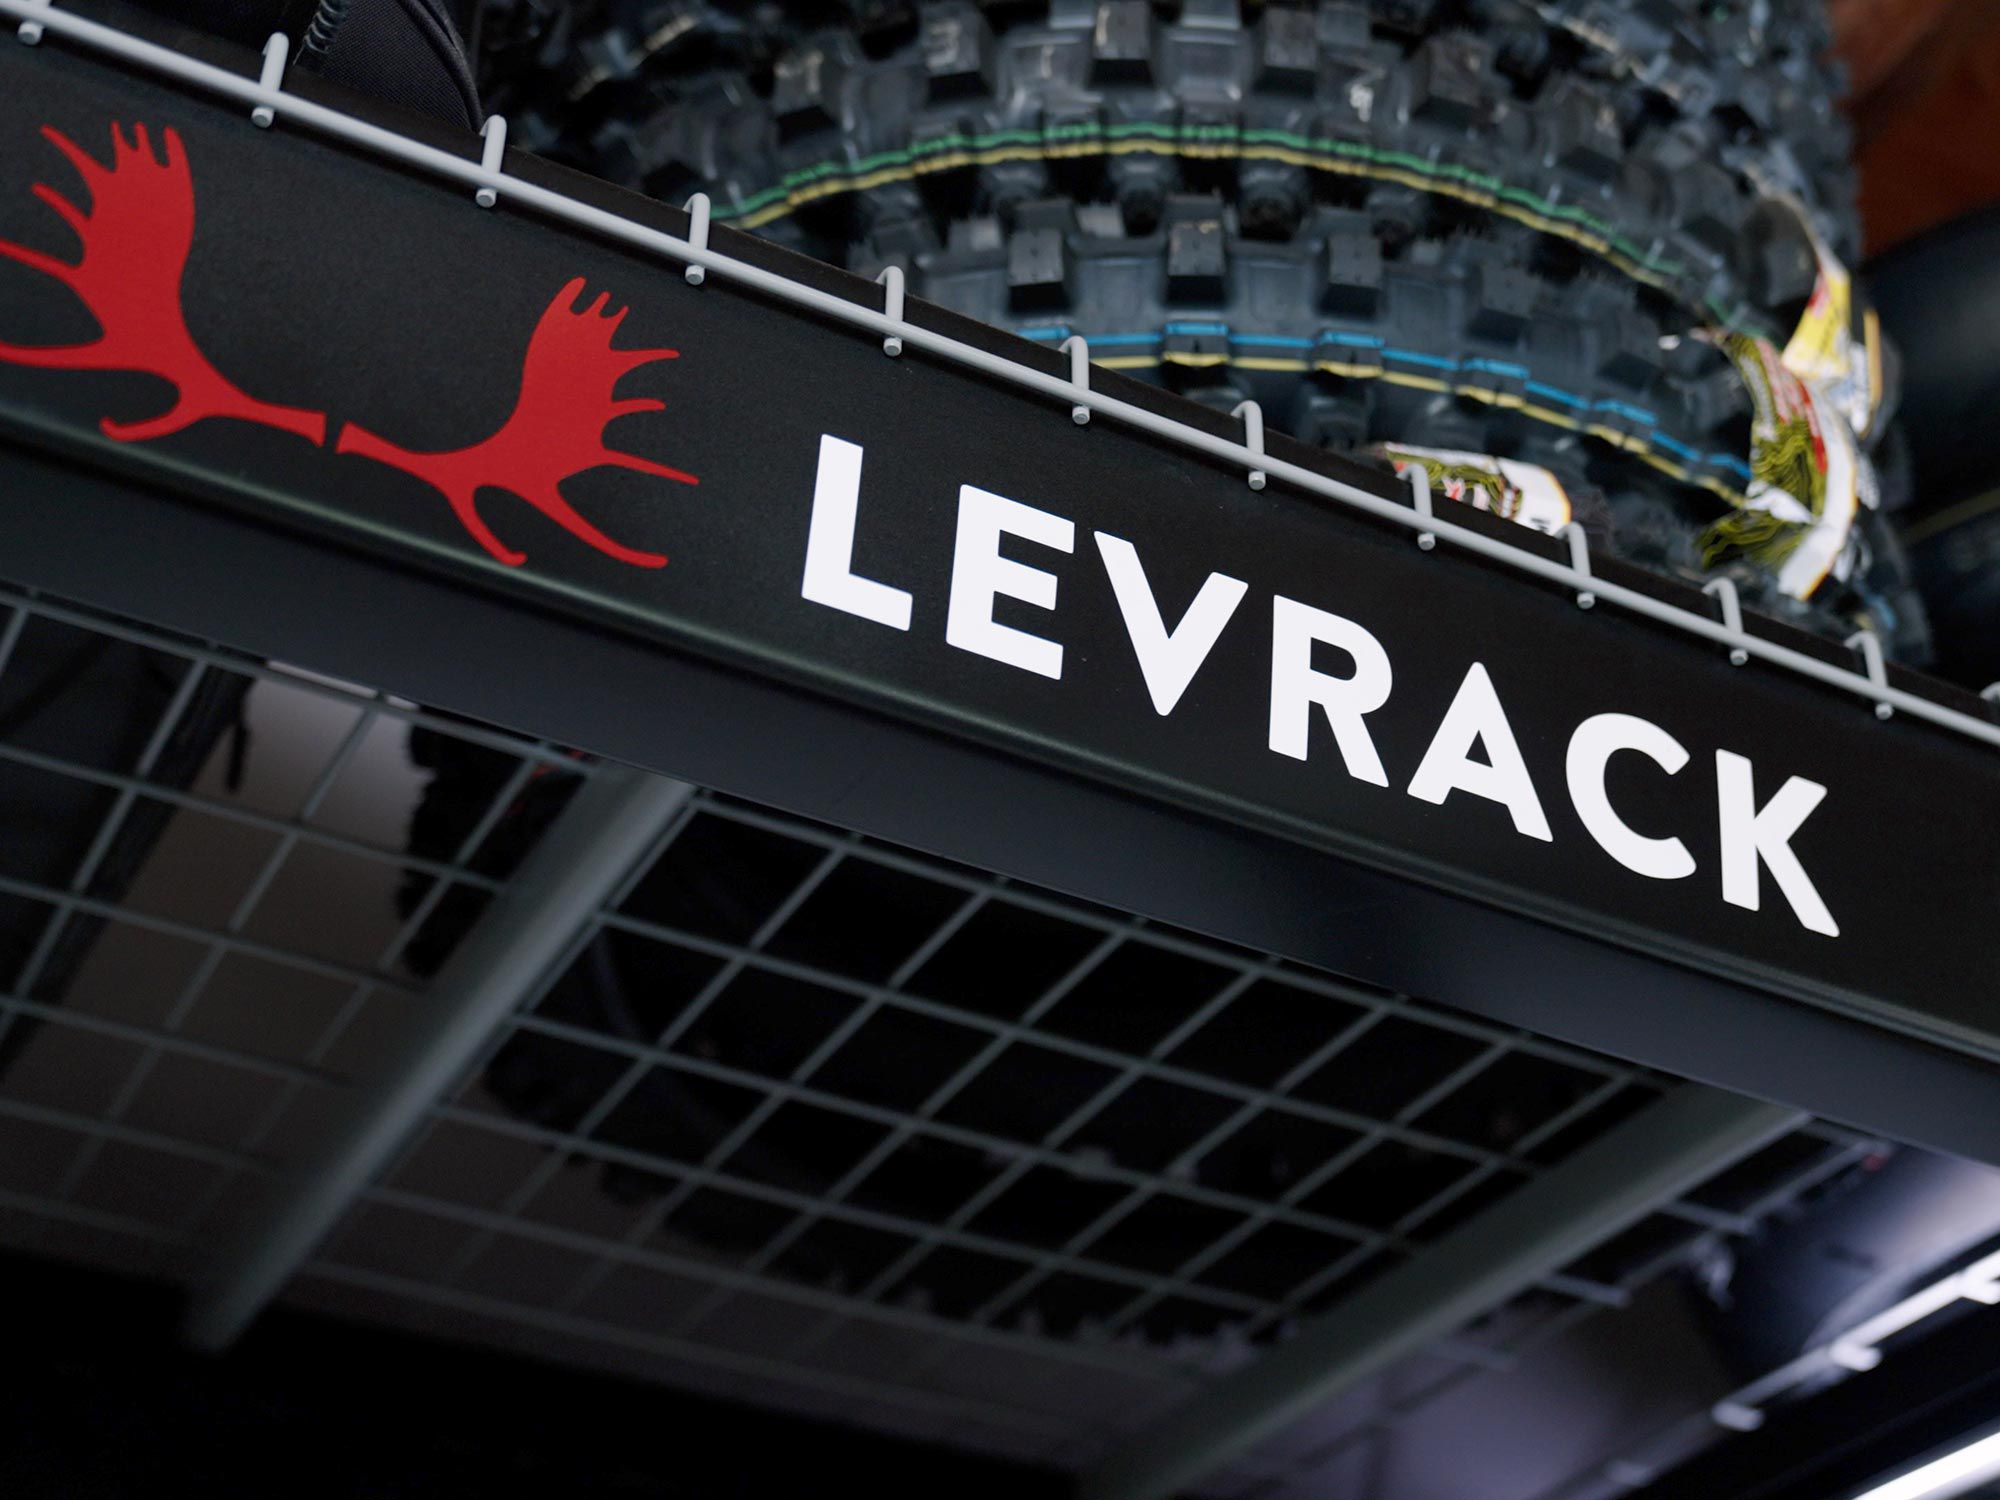 Levrack storage systems are manufactured in eastern Nebraska. They are sturdy and easy to assemble with the aid of a friend.